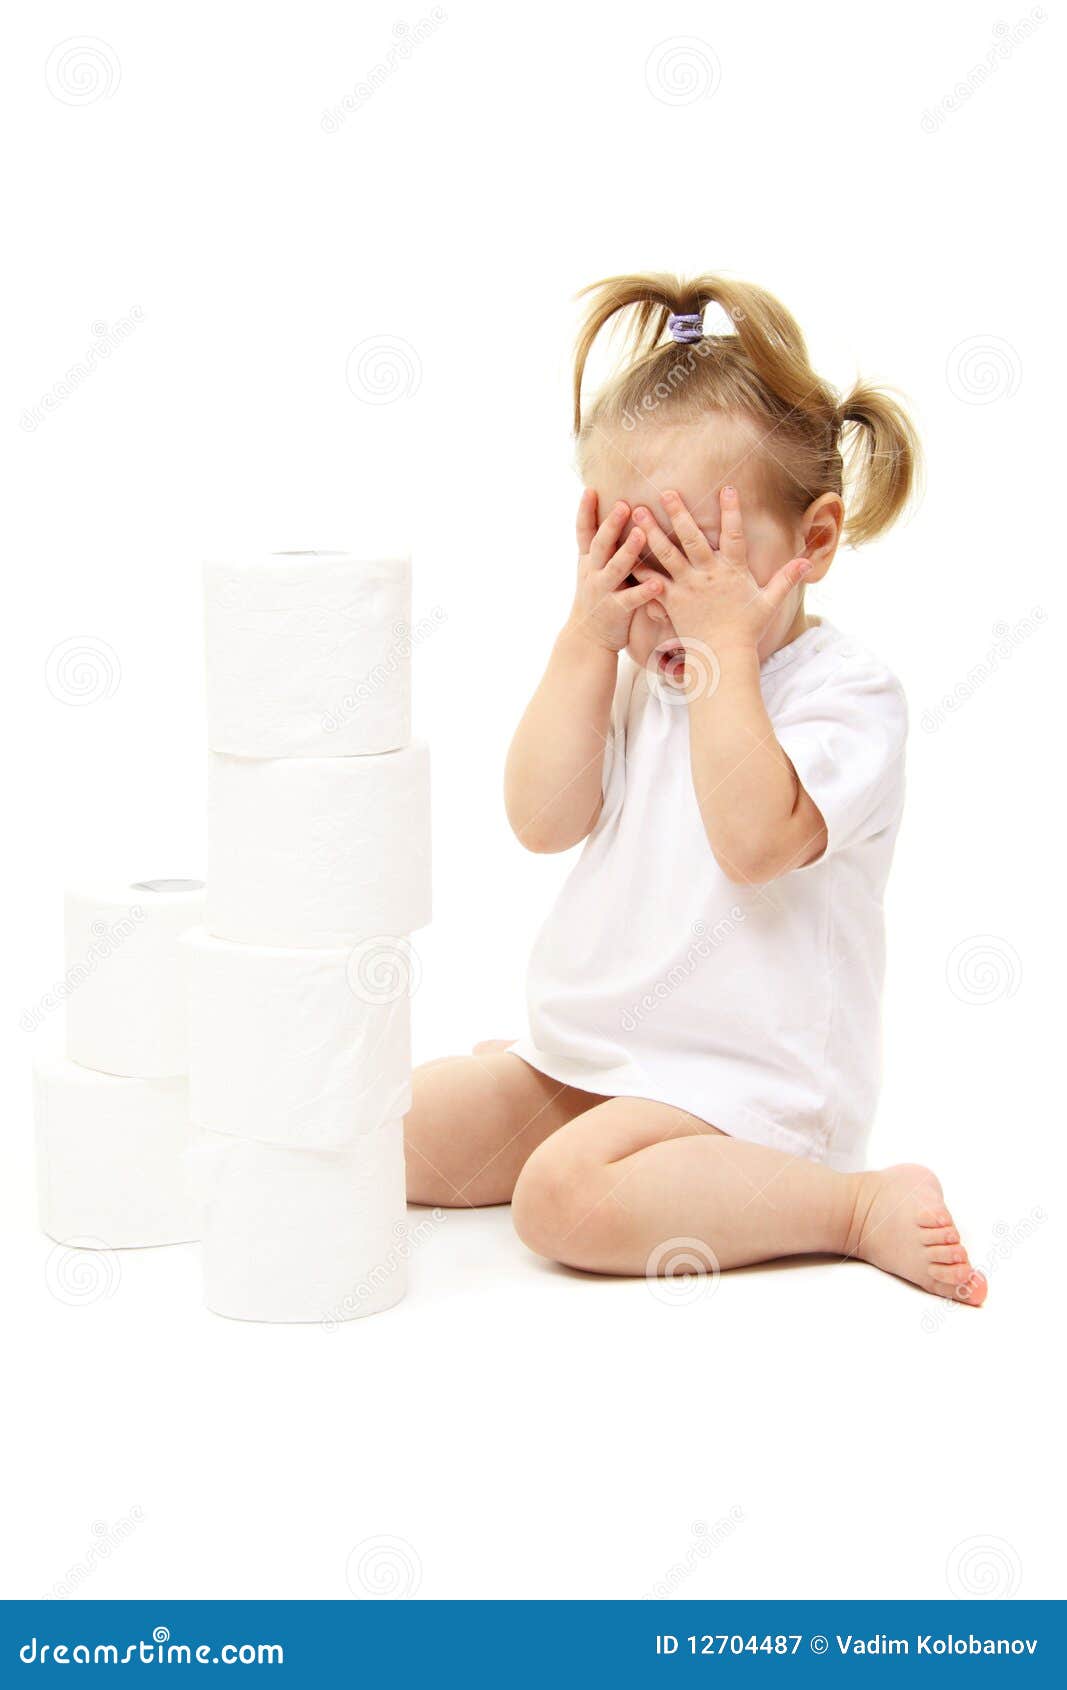 Toddler girl in underwear pulling at toilet roll - Stock Image